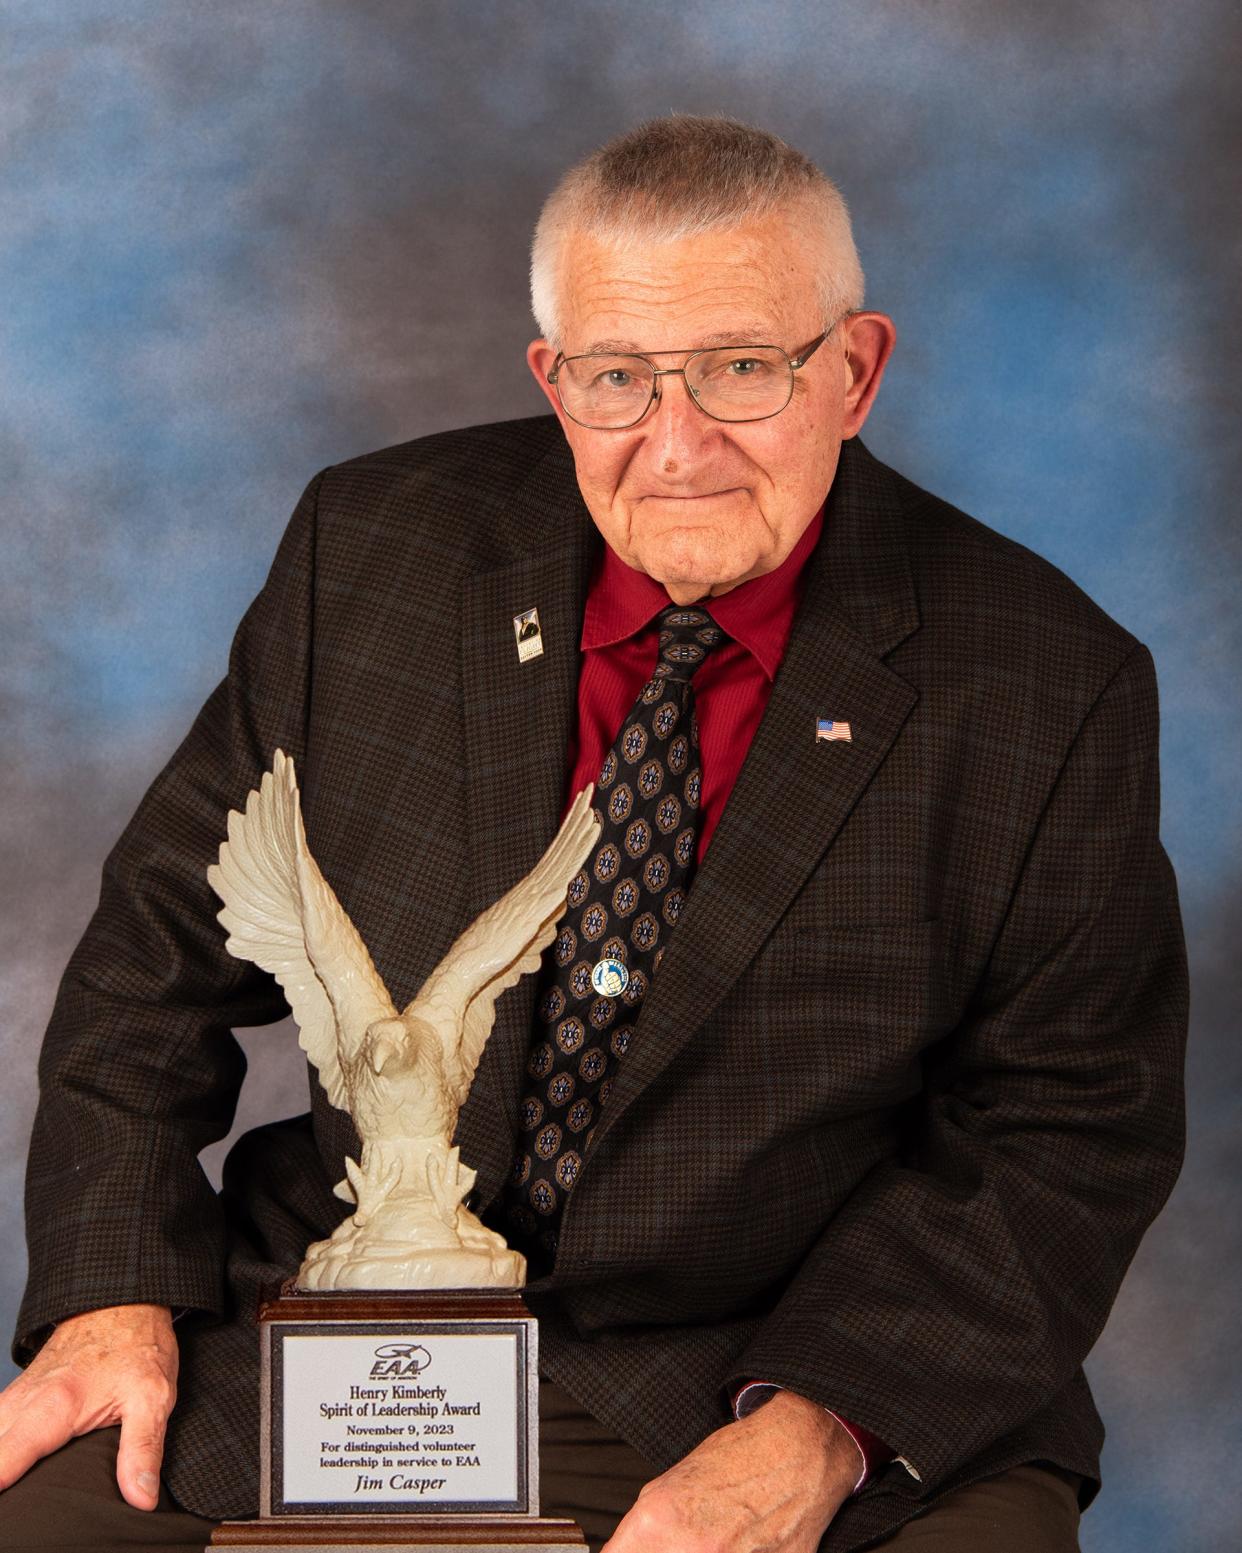 Jim Casper of Oshkosh recently received the Henry Kimberly Spirit of Leadership Award during the EAA Halls of Fame banquet for his four decades of contributions to EAA.